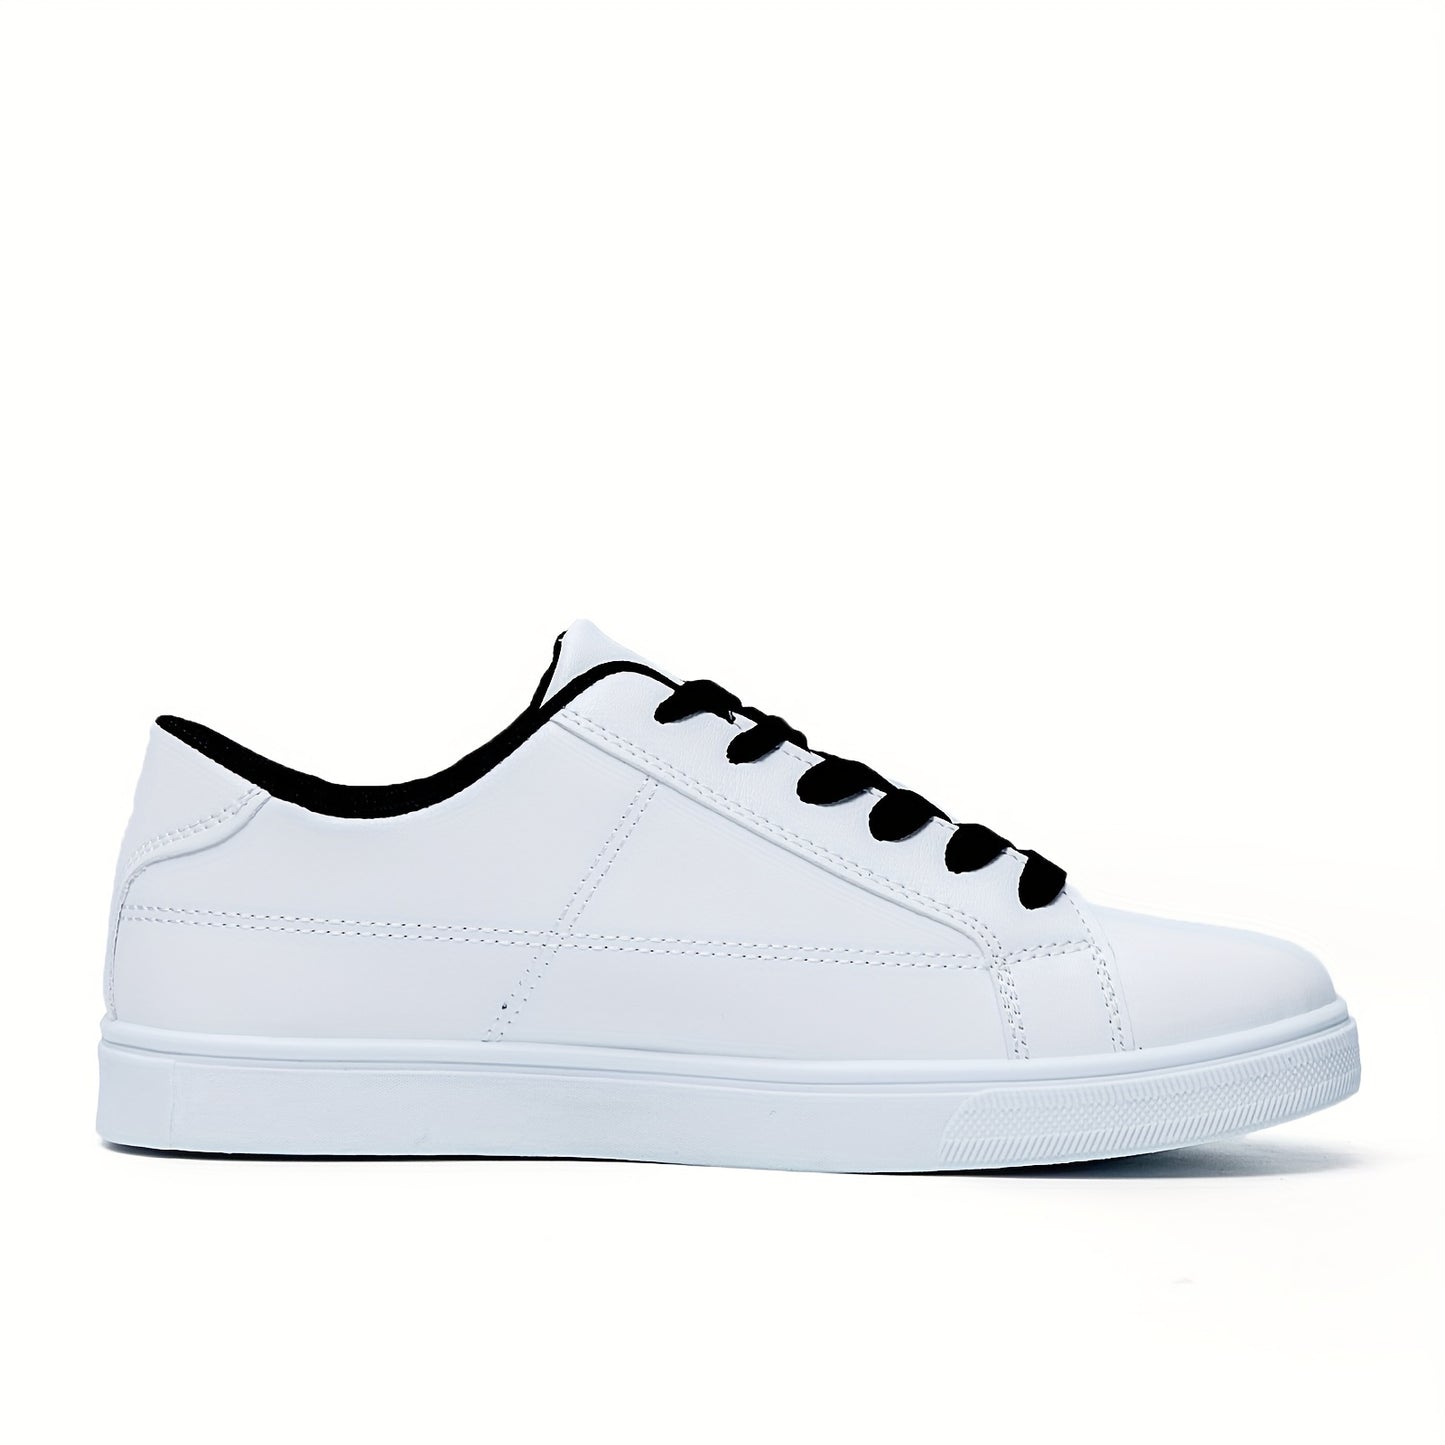 Men's Minimalist Wear-resistant Sneaker For Youth, Spring And Summer